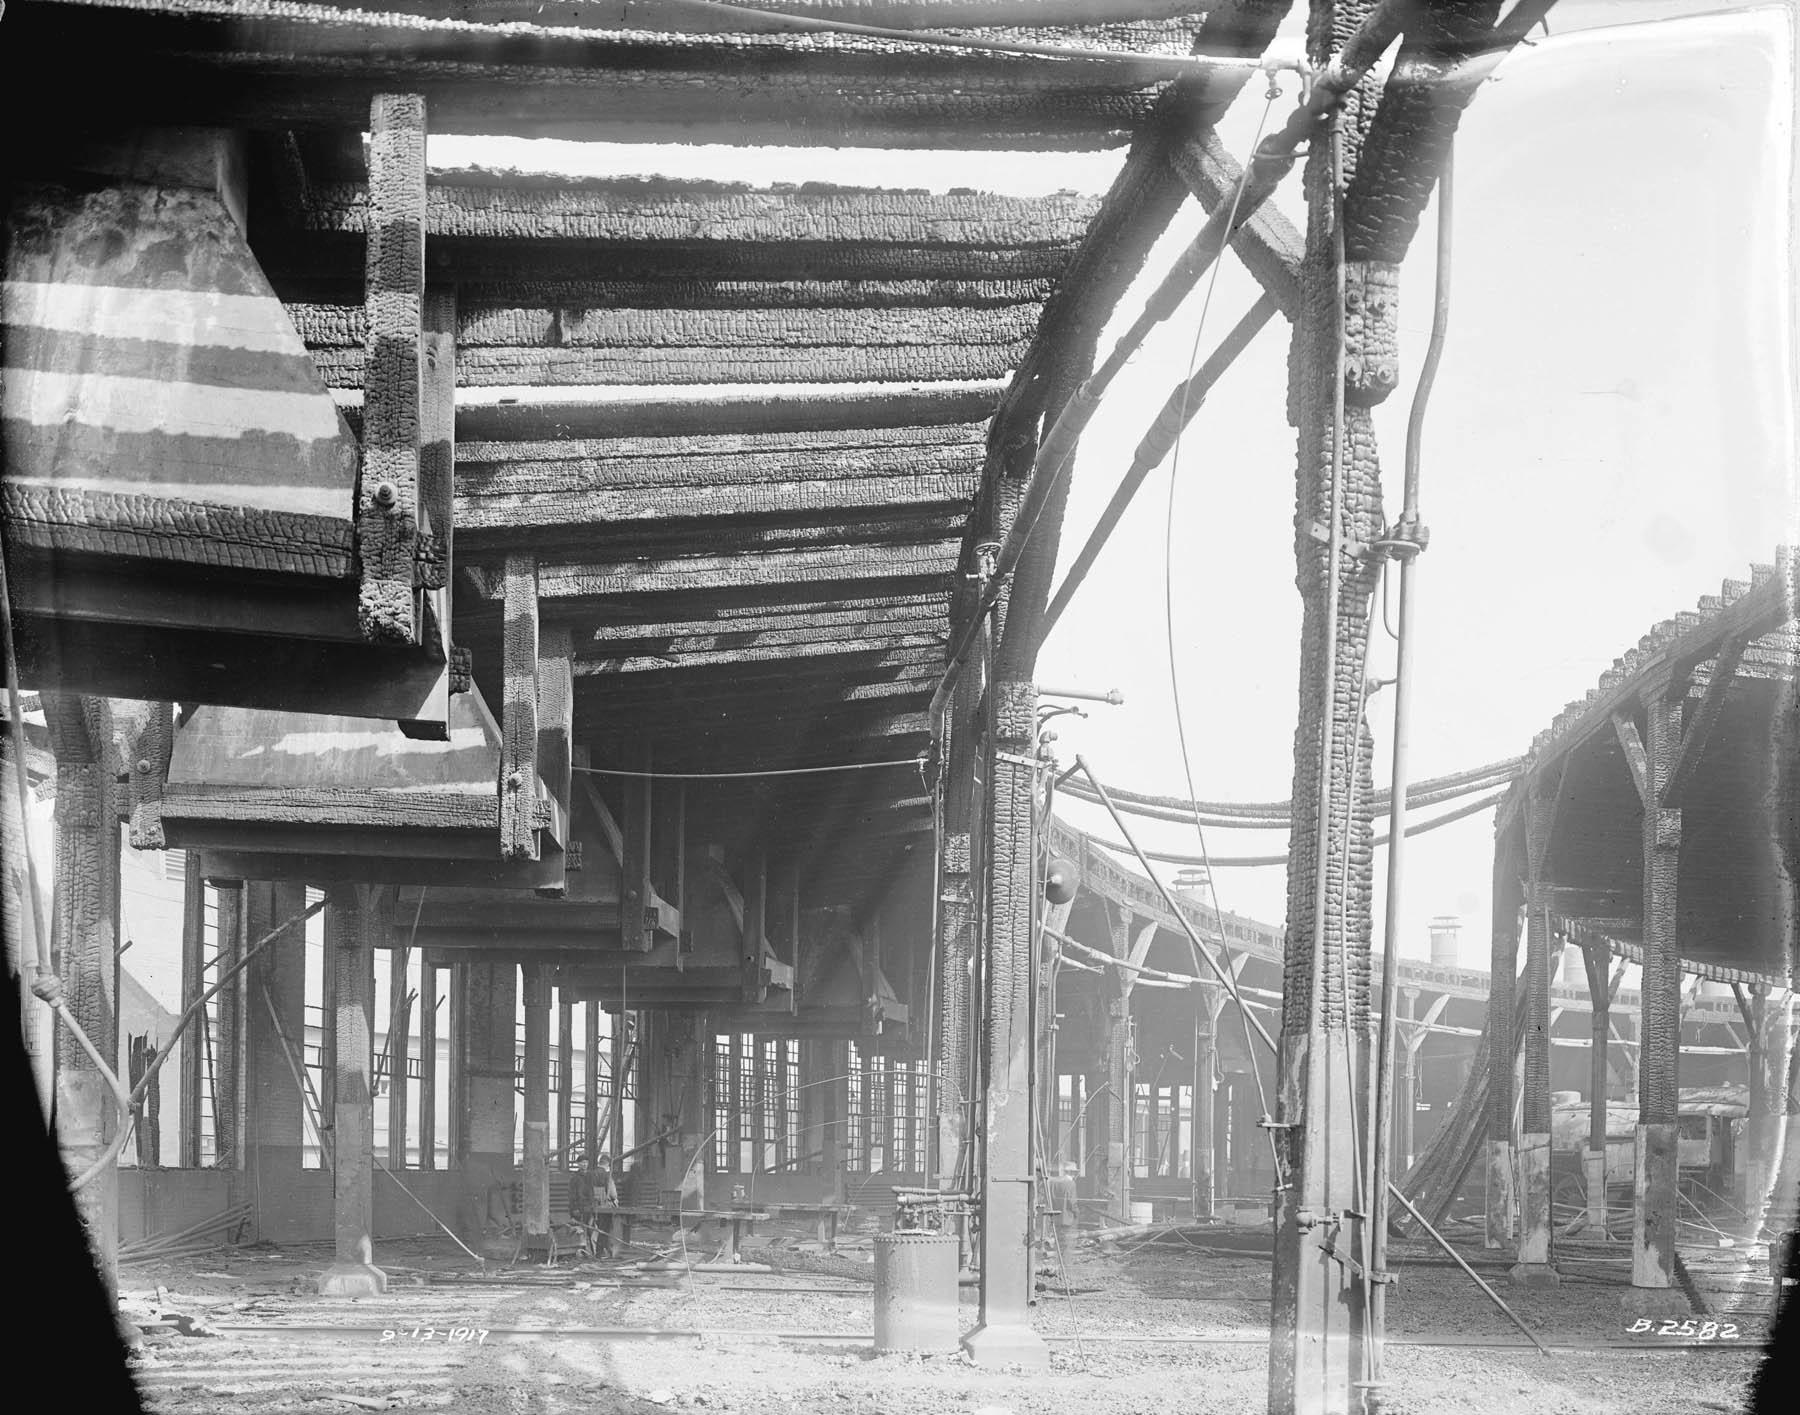 Charred D.L. & W. roundhouse exterior after fire